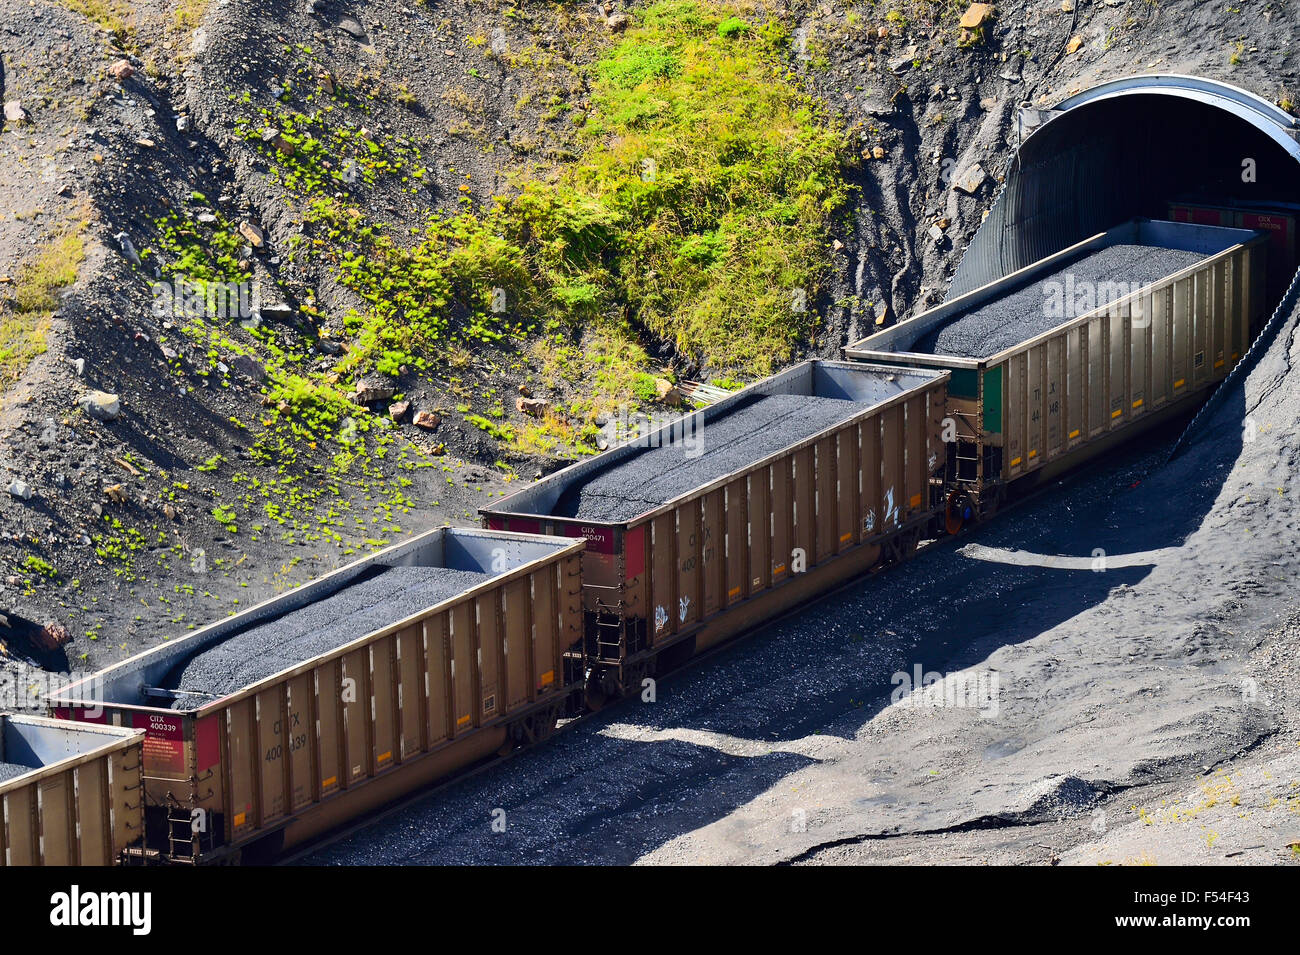 A close up horizontal image of railway cars loaded with coal oar traveling through a tunnel Stock Photo